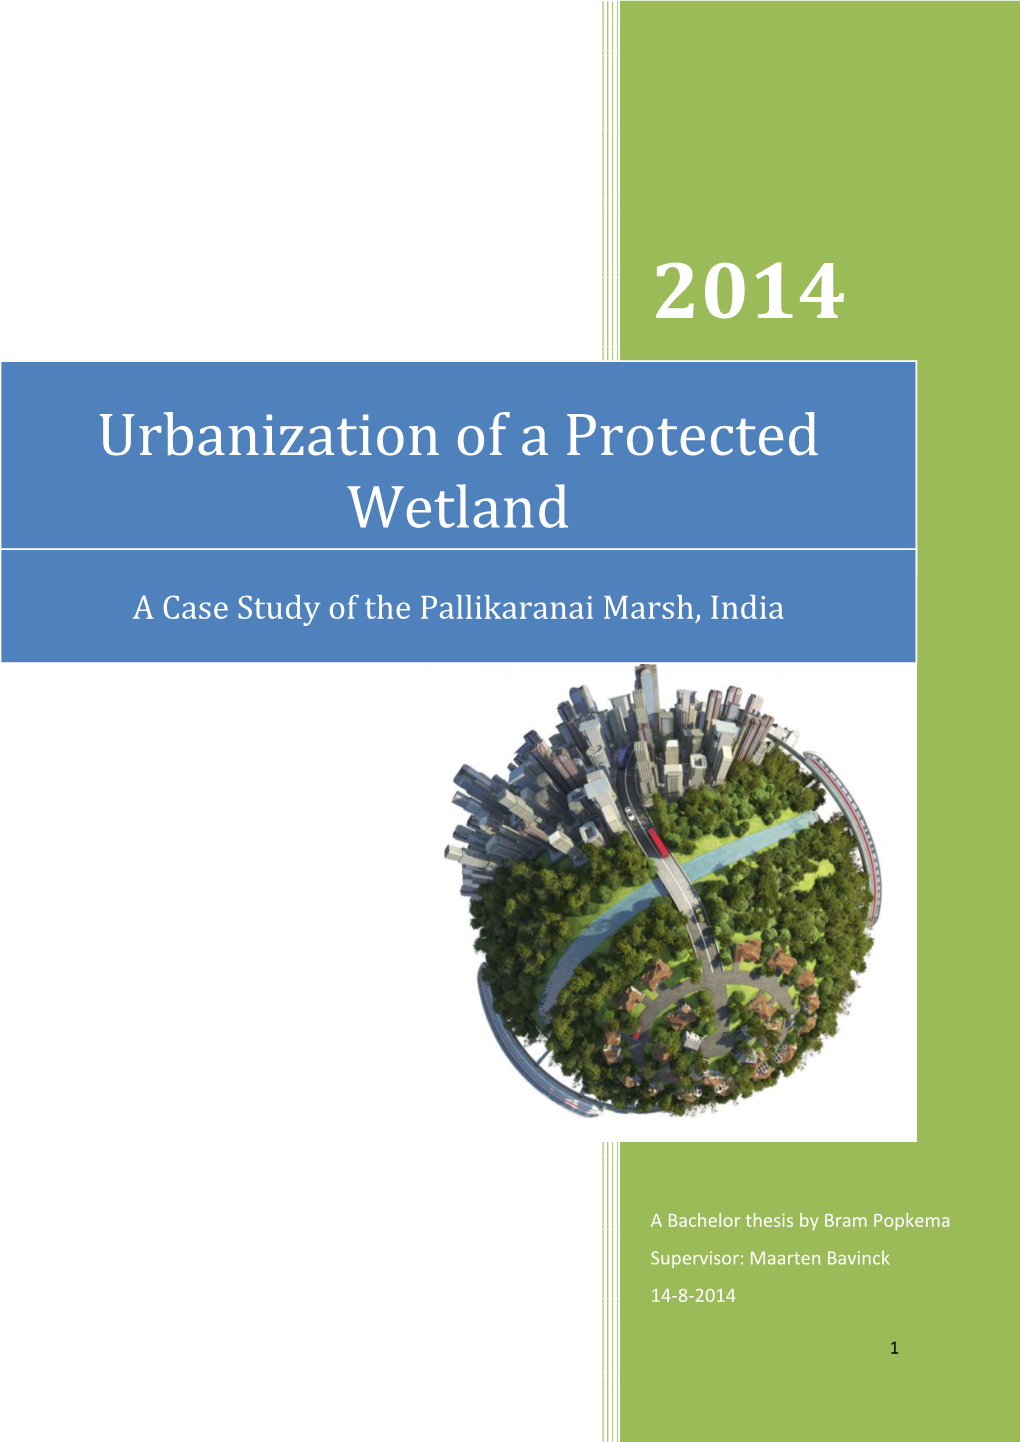 Urbanization of a Protected Wetland